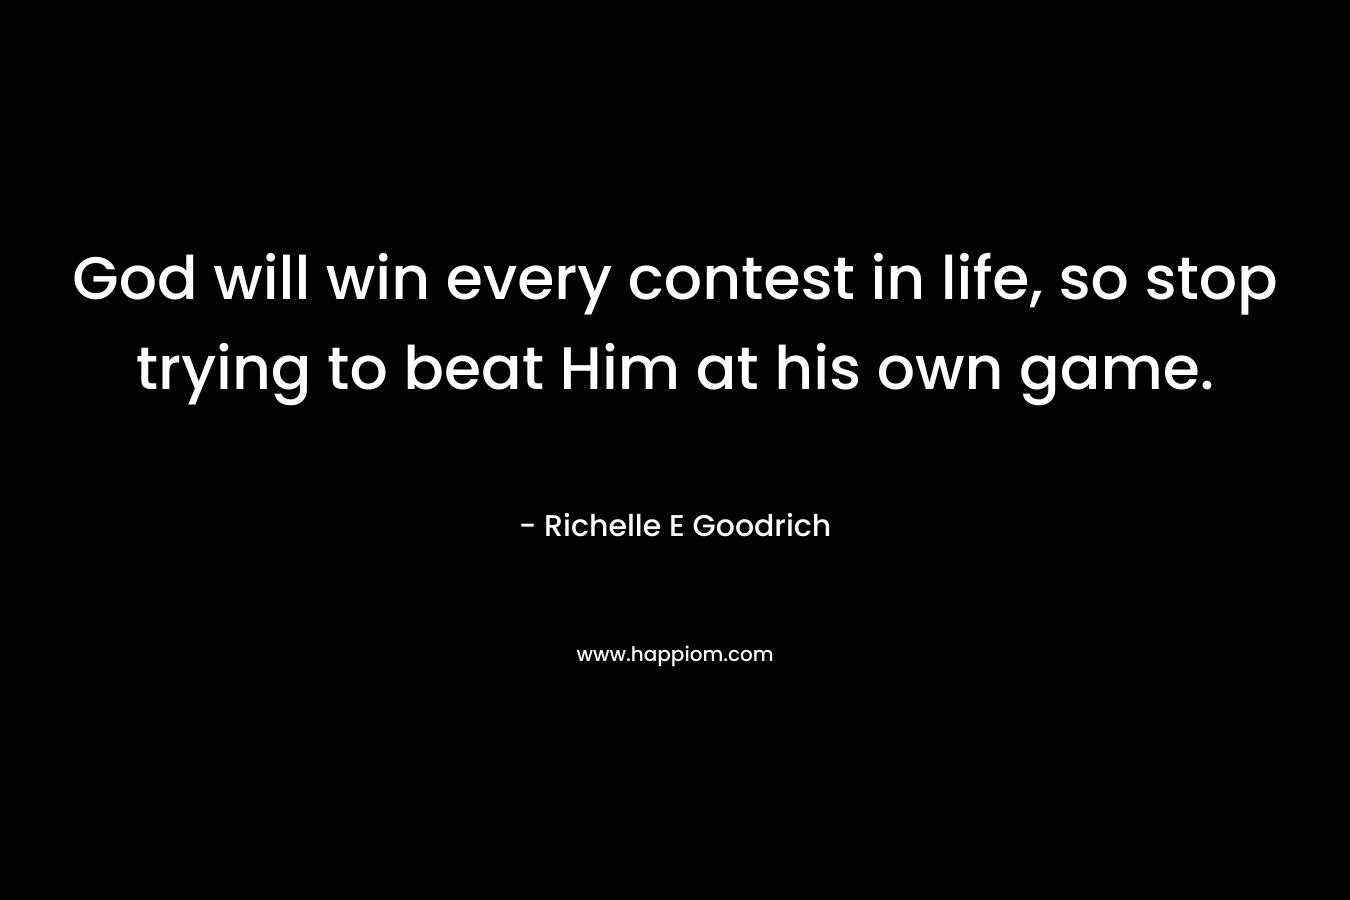 God will win every contest in life, so stop trying to beat Him at his own game.